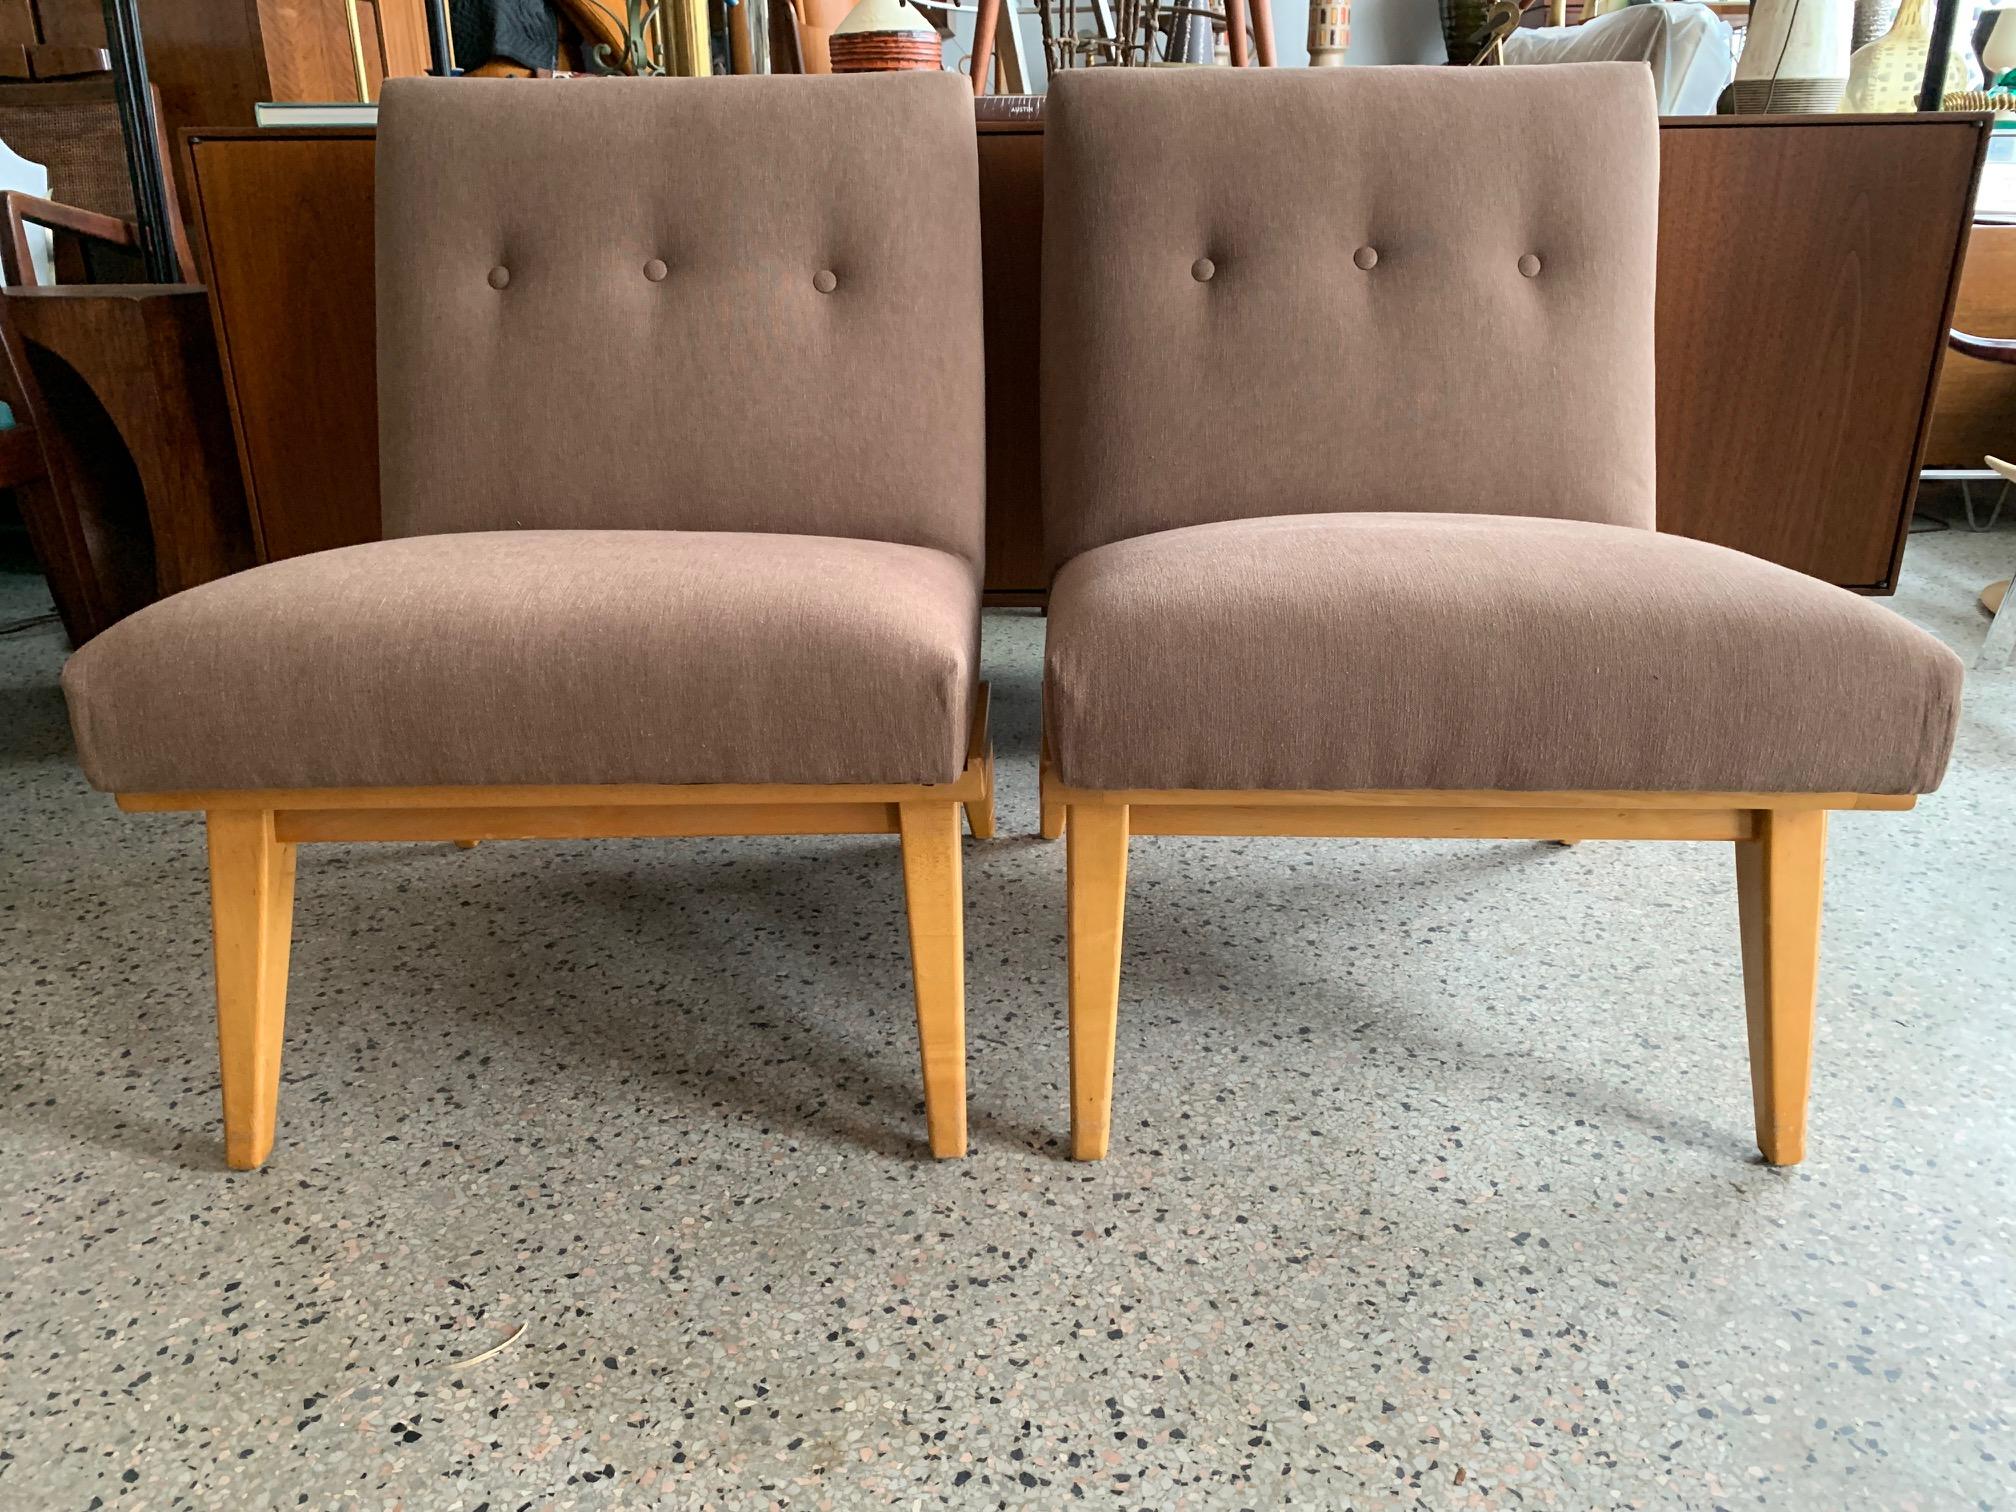 A great pair of early production Knoll, designed by Jens Risom, slipper chairs, circa 1950s with maple frames and early labels. Reupholstered in heavy cotton/denim fabric (85% cotton) by Spechler-Vogel Textiles, NYC.